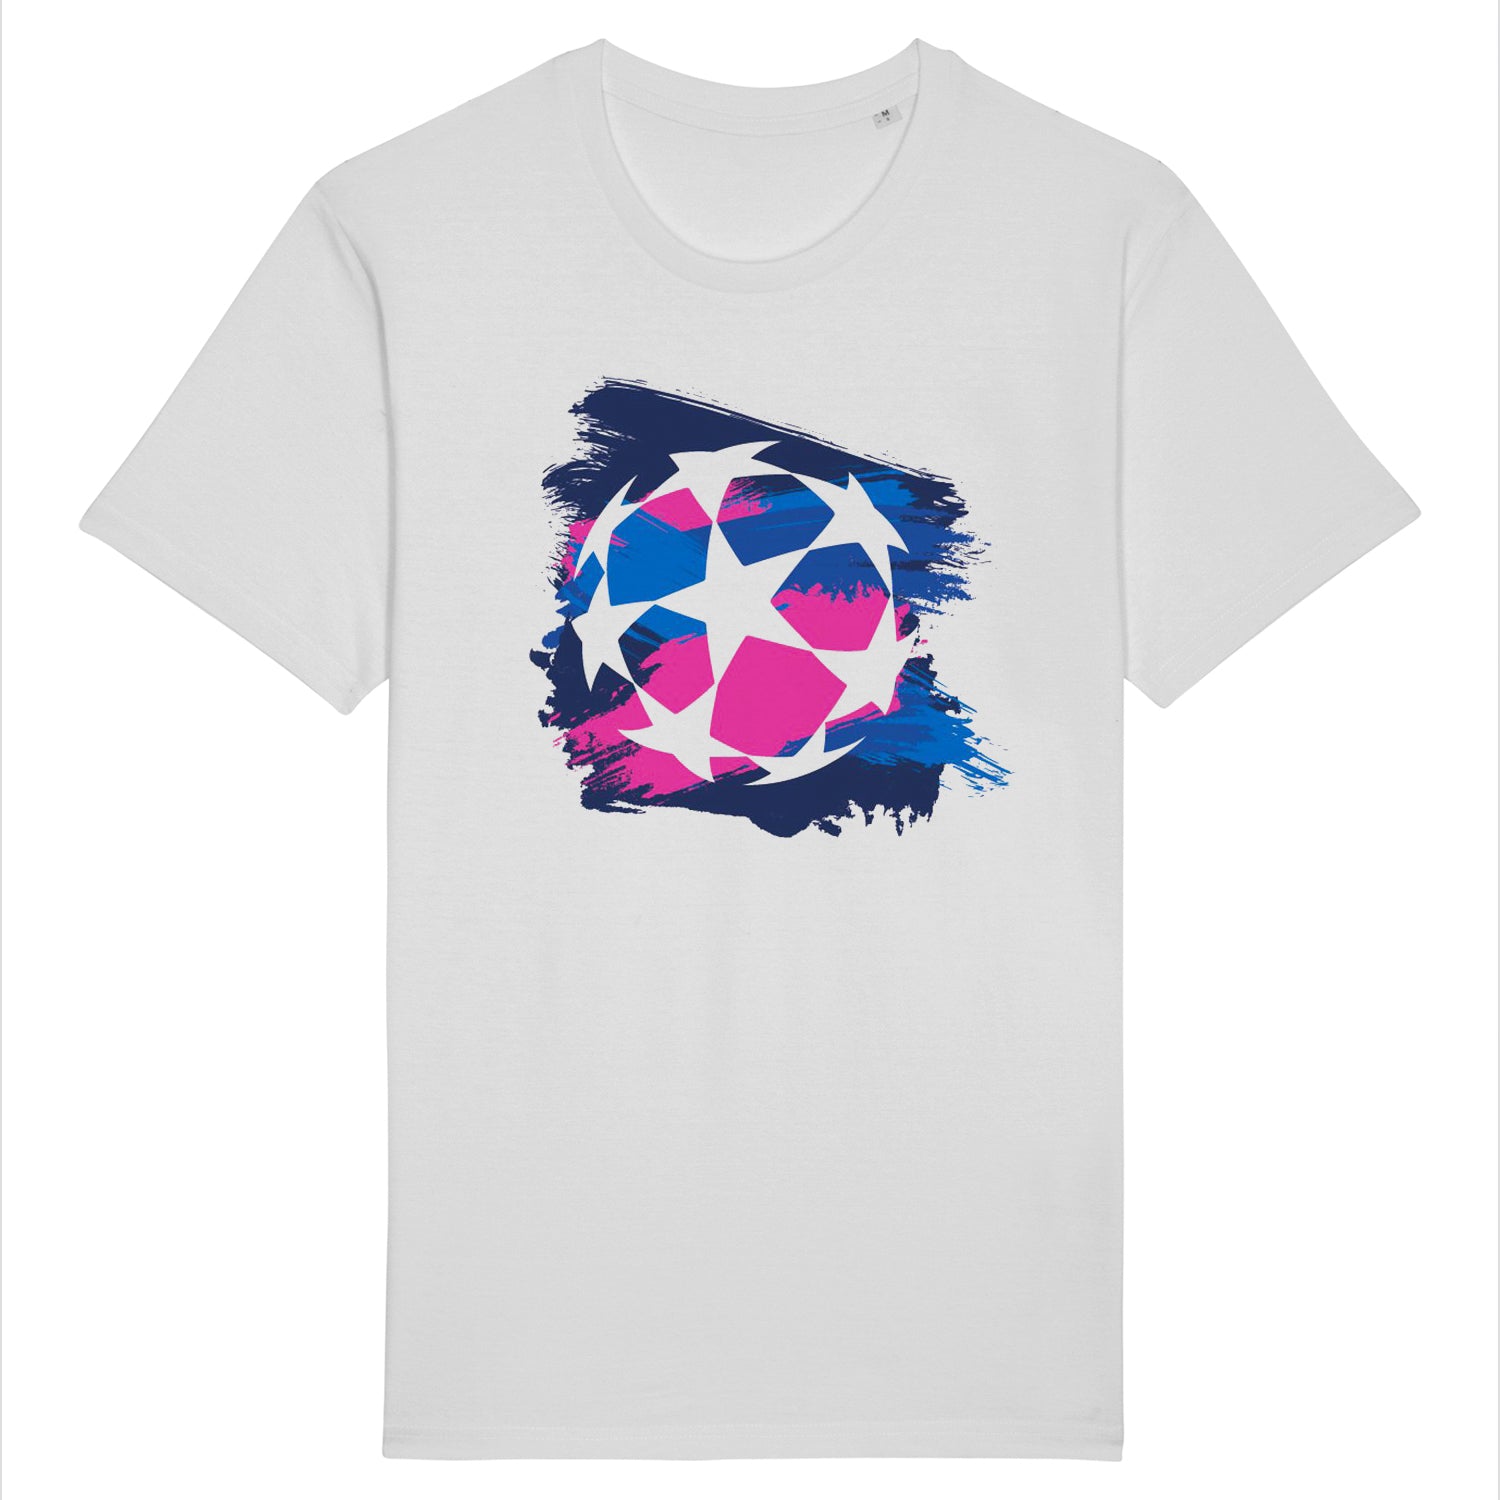 UEFA Champions League - Starball Grunge White T-Shirt UEFA Club Competitions Online Store